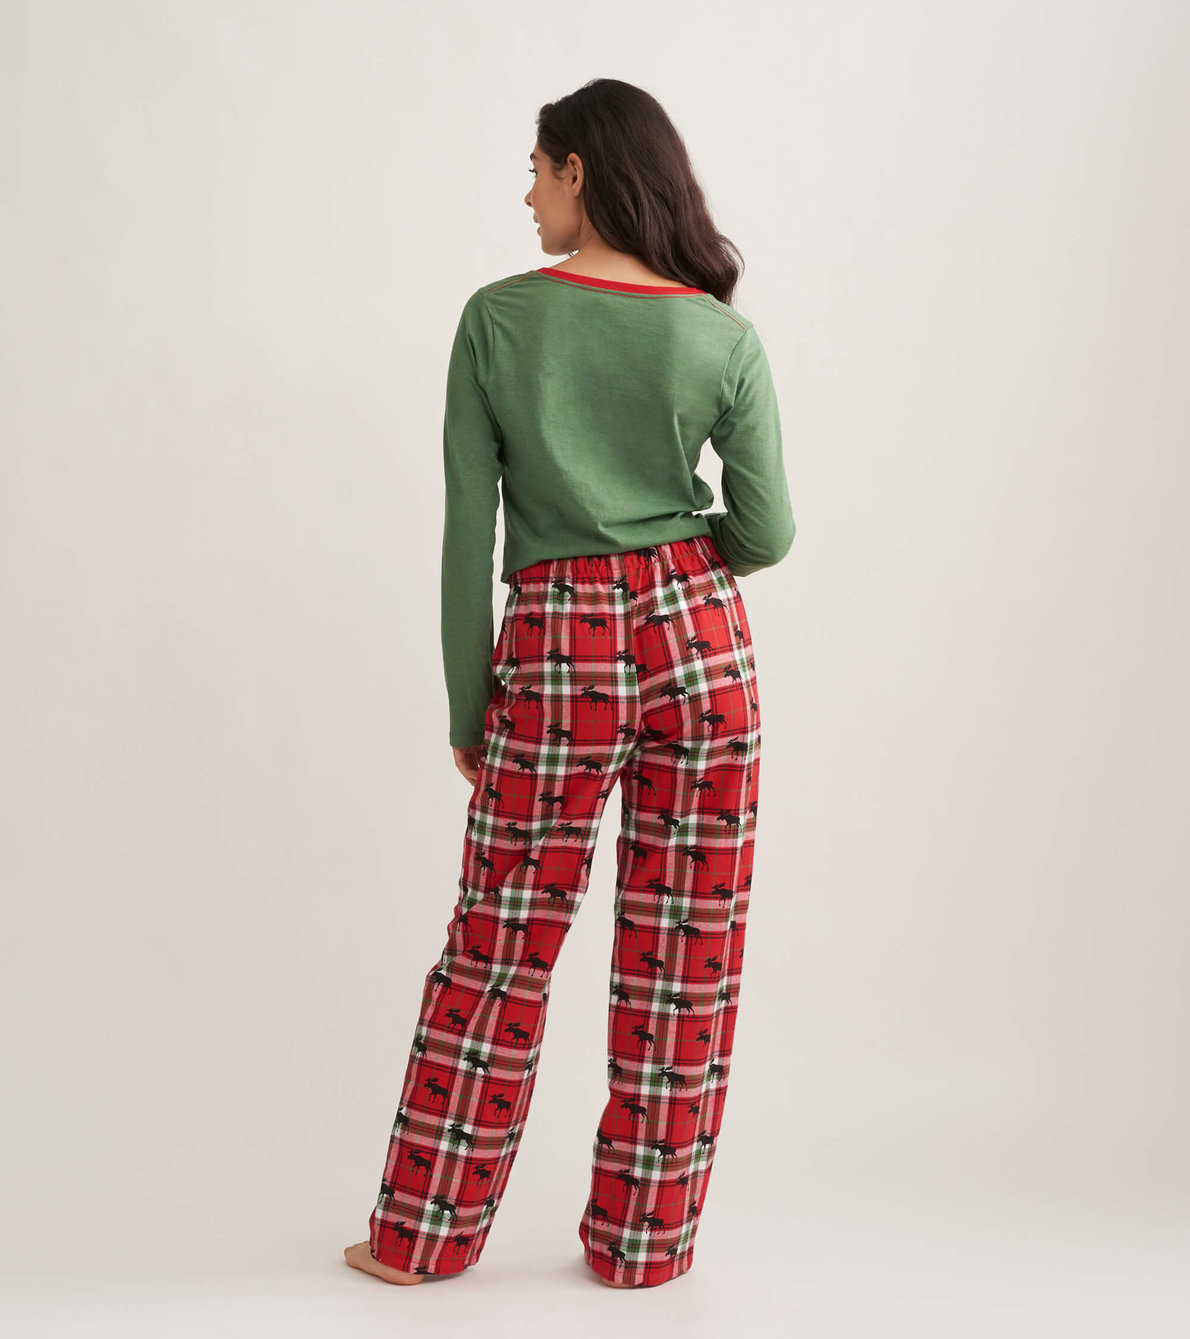 View larger image of Holiday Moose on Plaid Women's Tee and Pants Pajama Separates